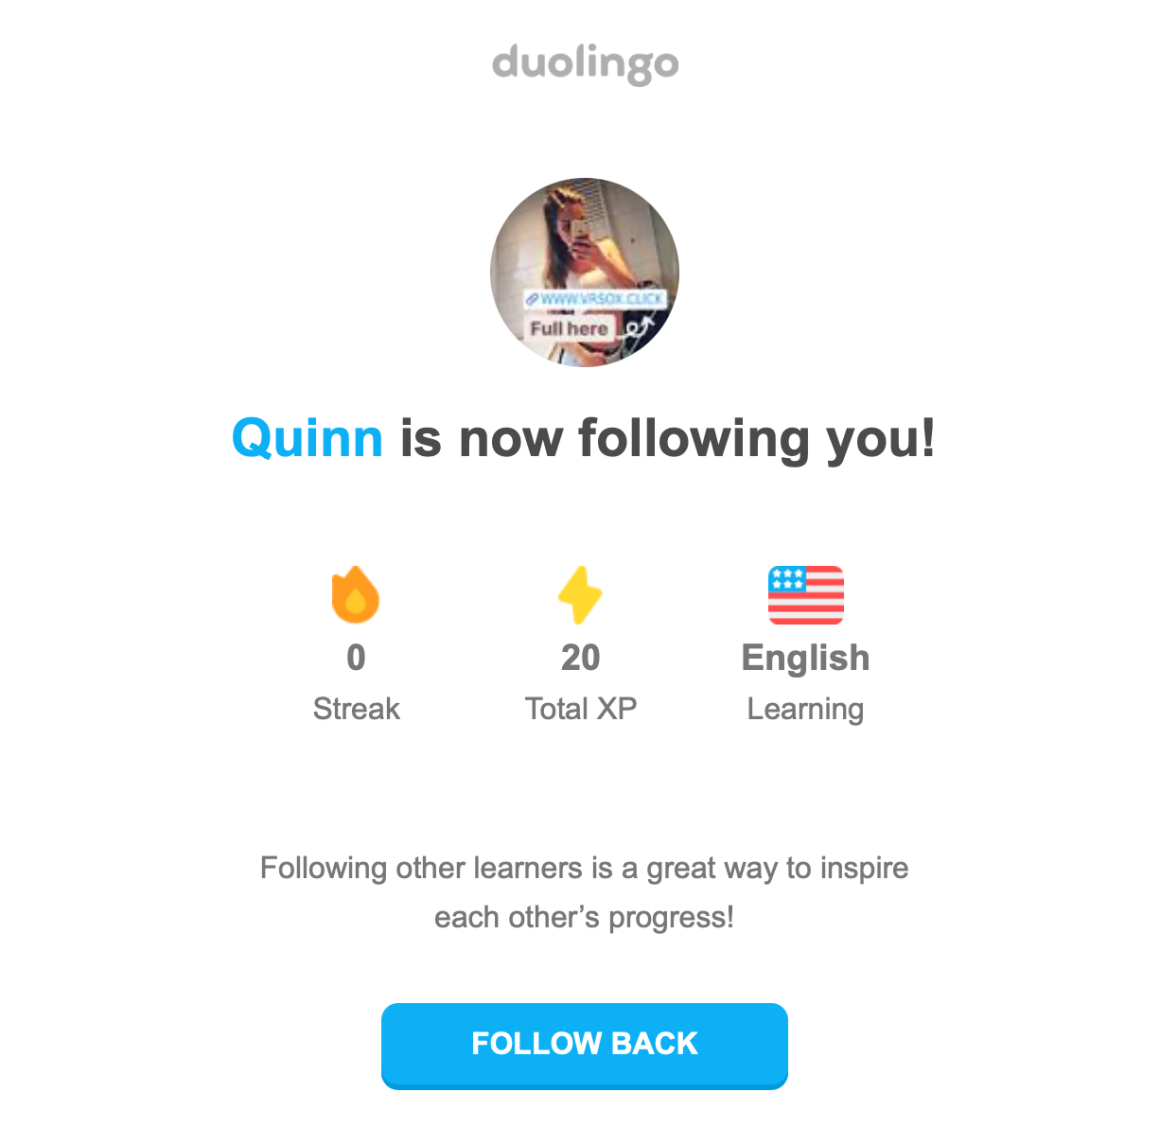 duolingo gamification follow onboarding email